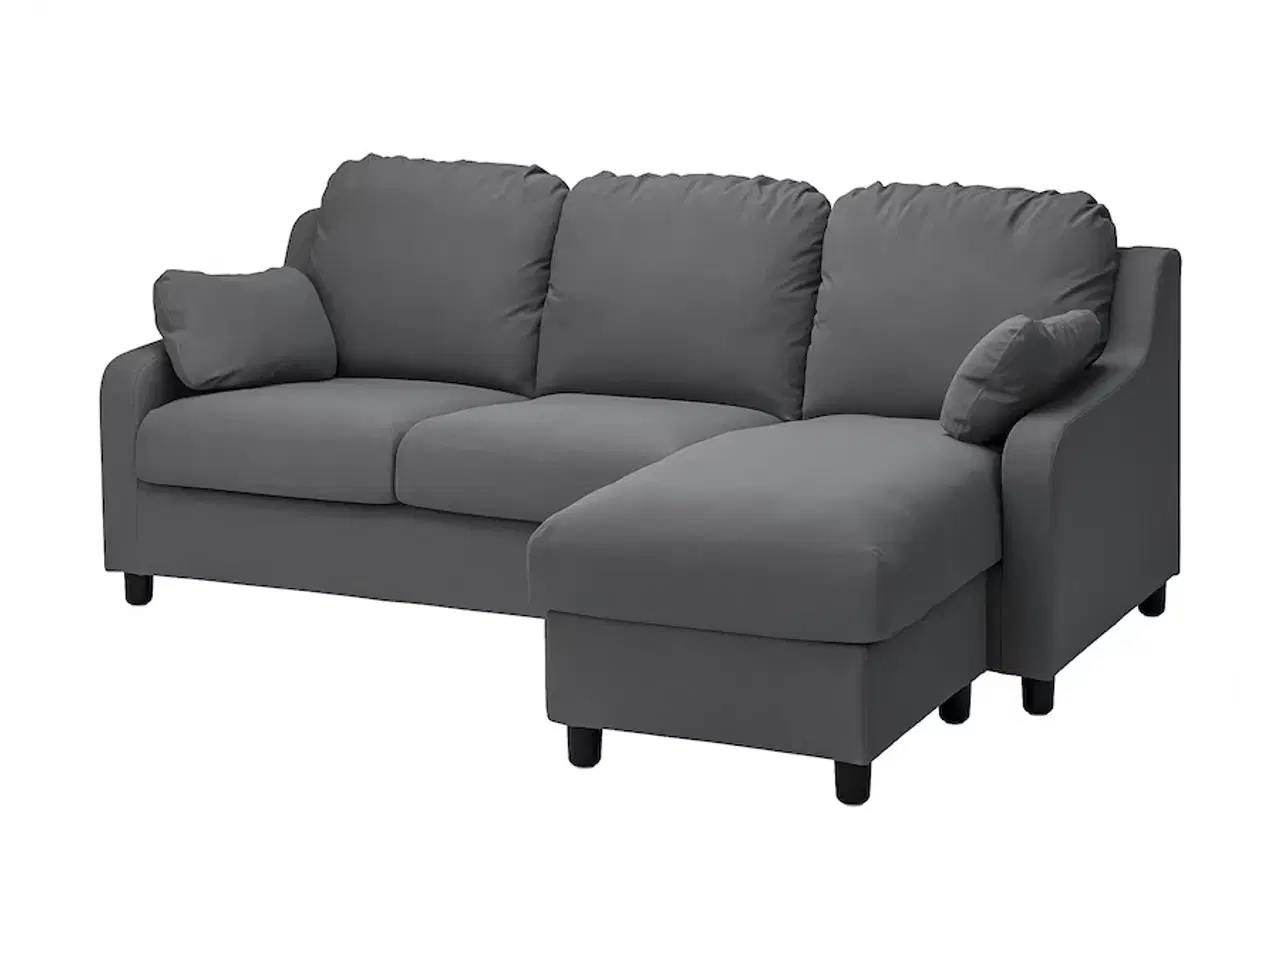 Billede 3 - Couch for Sale